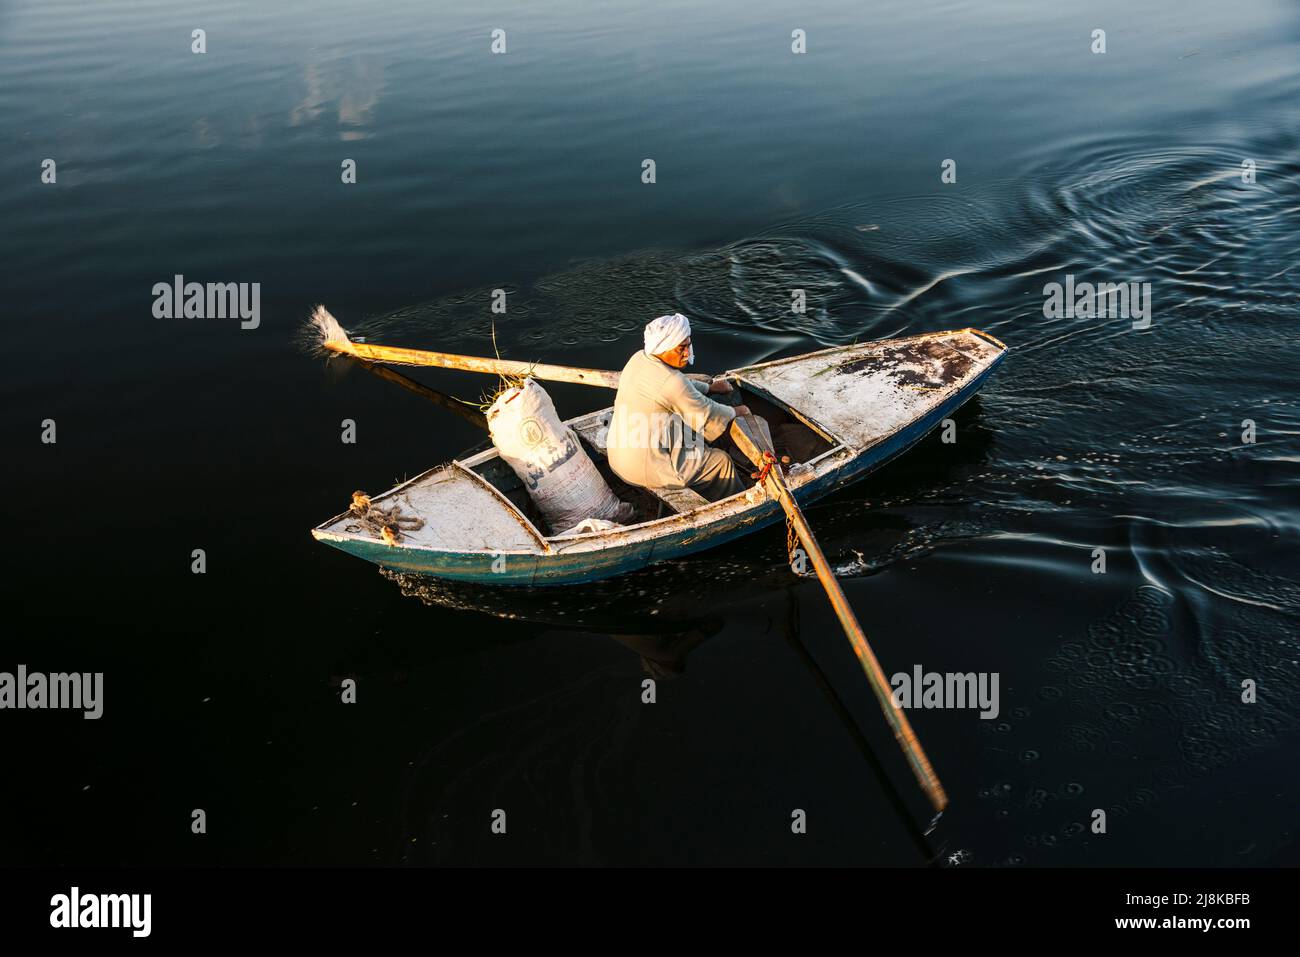 man in a small row boat on the Nile River Stock Photo